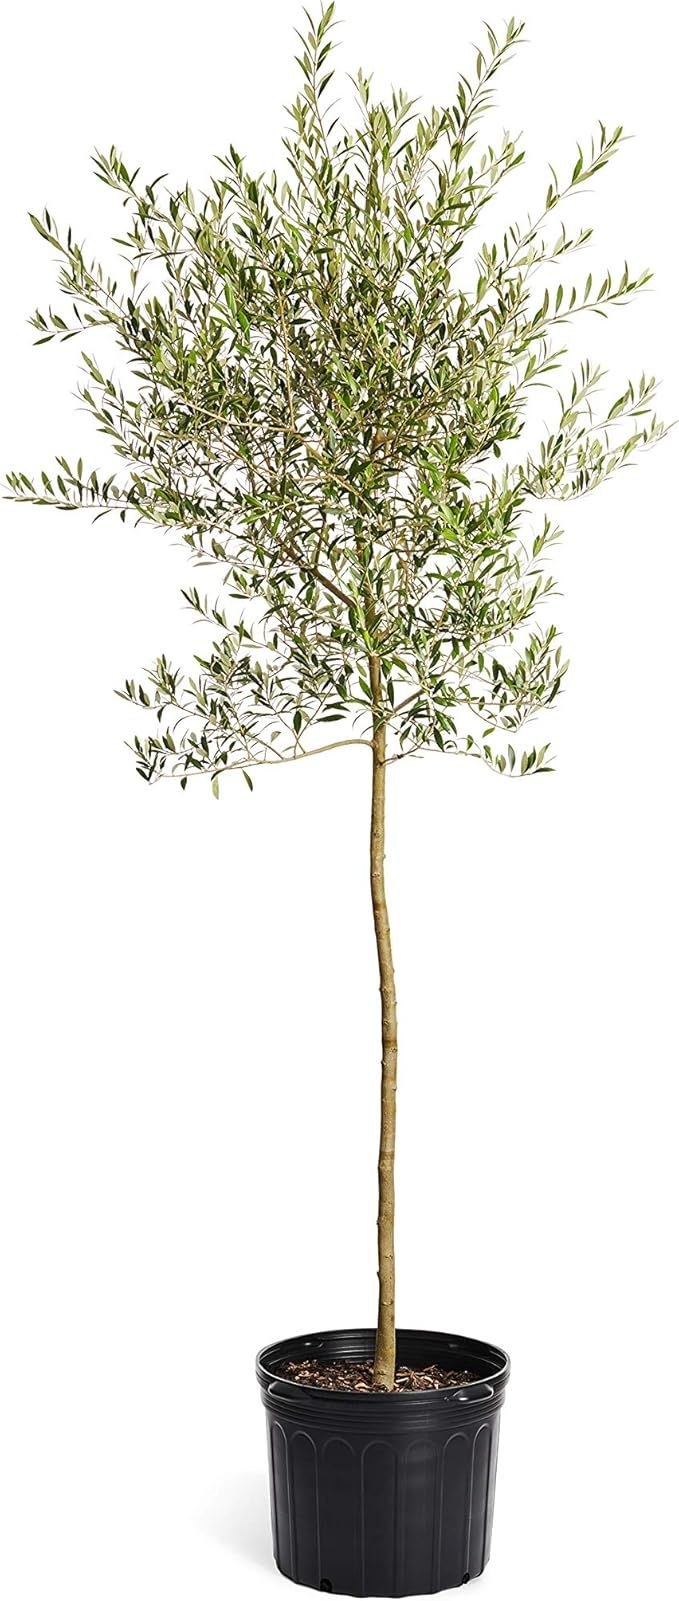 Brighter Blooms - Arbequina Olive Tree - 5-6 Feet Tall - Indoor/Patio Live Olive Trees - No Shipp... | Amazon (US)